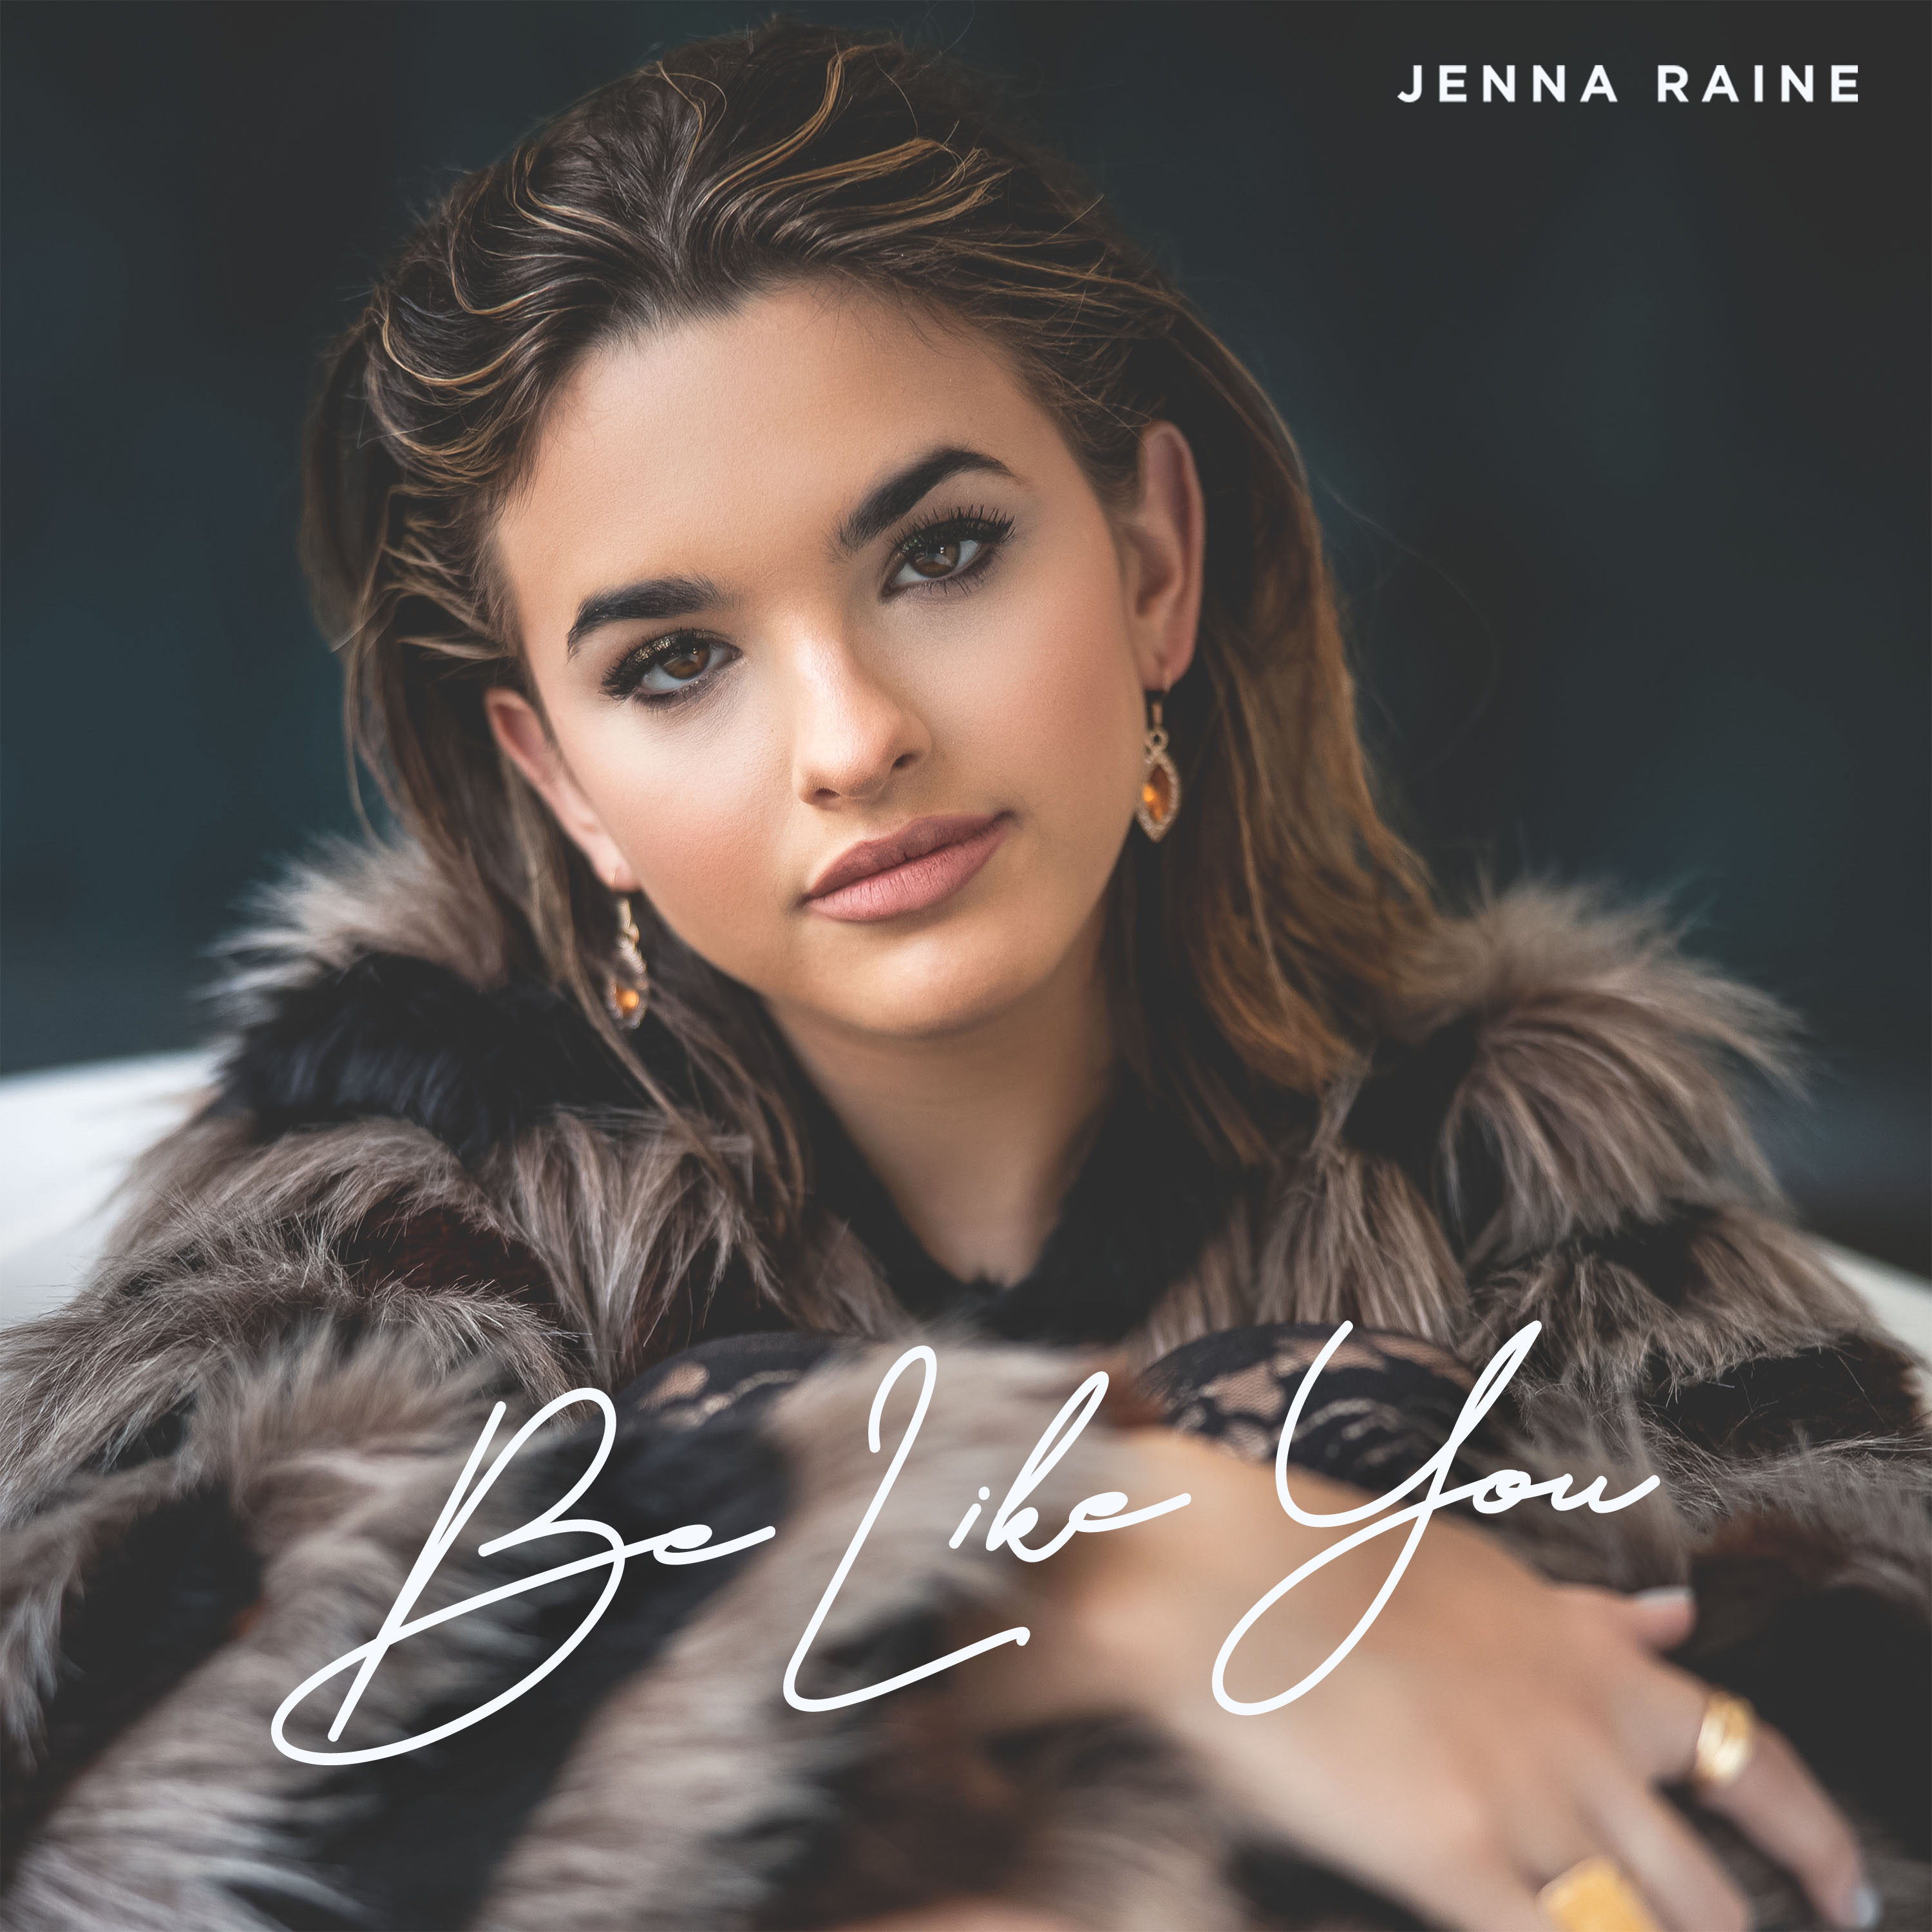 Jenna Raine’s new EP “Be Like You” is out on all streaming platforms today!